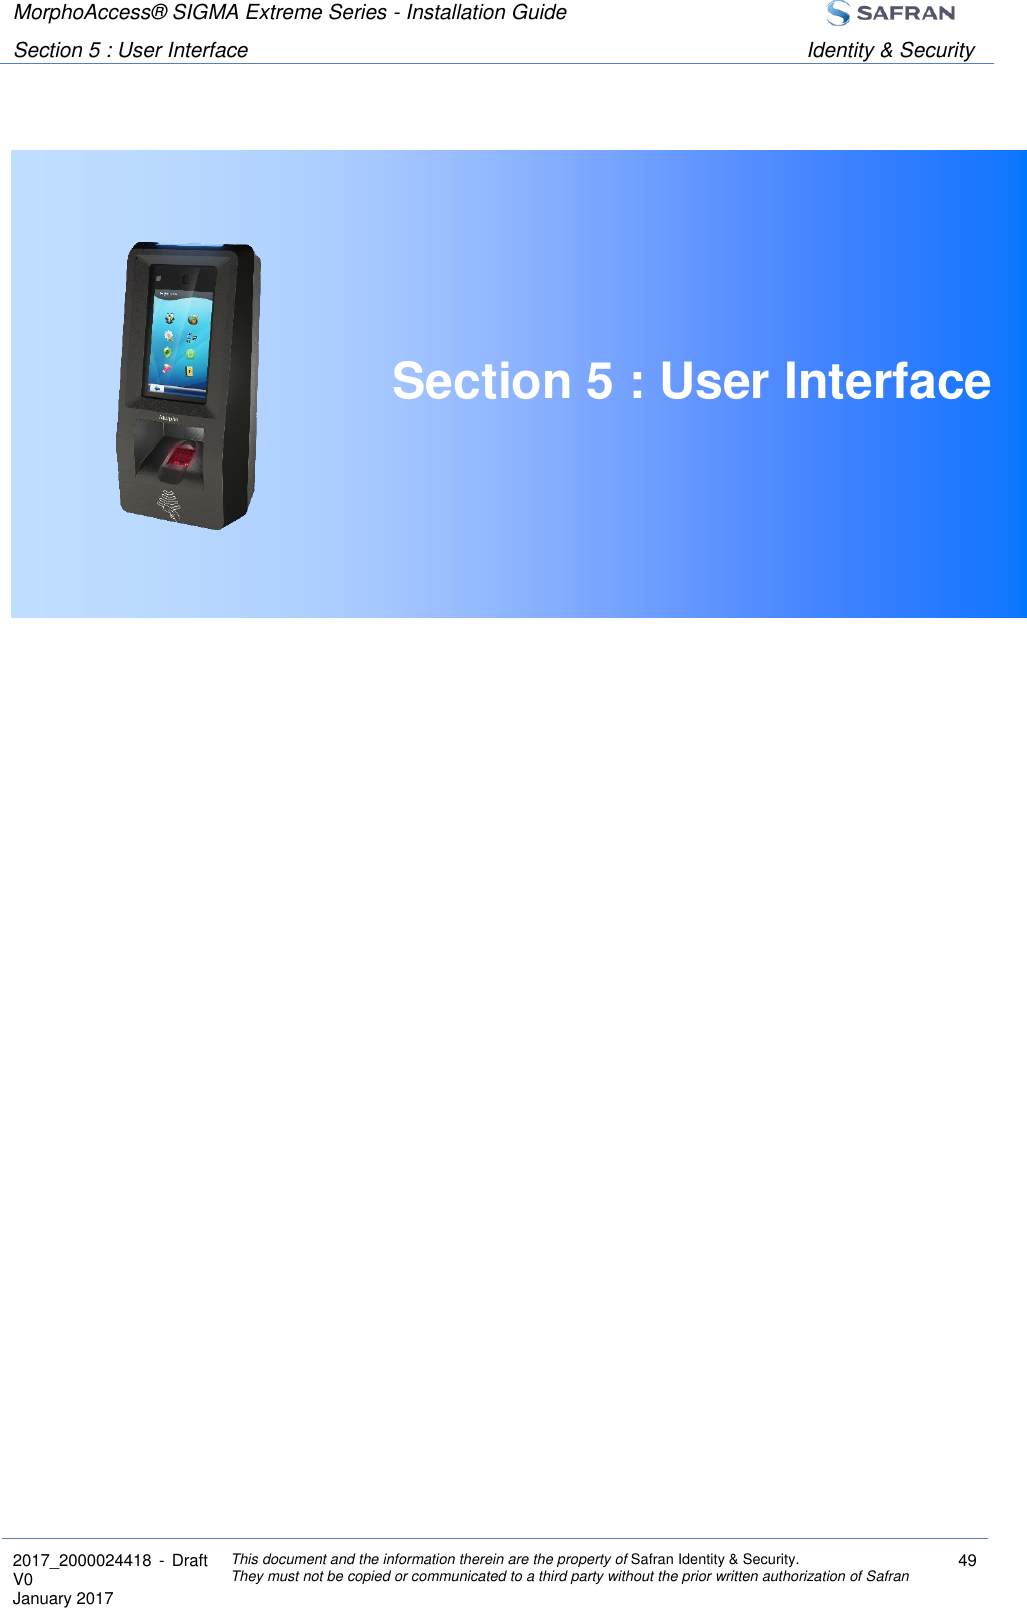 MorphoAccess® SIGMA Extreme Series - Installation Guide  Section 5 : User Interface Identity &amp; Security  2017_2000024418  - Draft V0 January 2017 This document and the information therein are the property of Safran Identity &amp; Security. They must not be copied or communicated to a third party without the prior written authorization of Safran 49   Section 5 : User Interface     